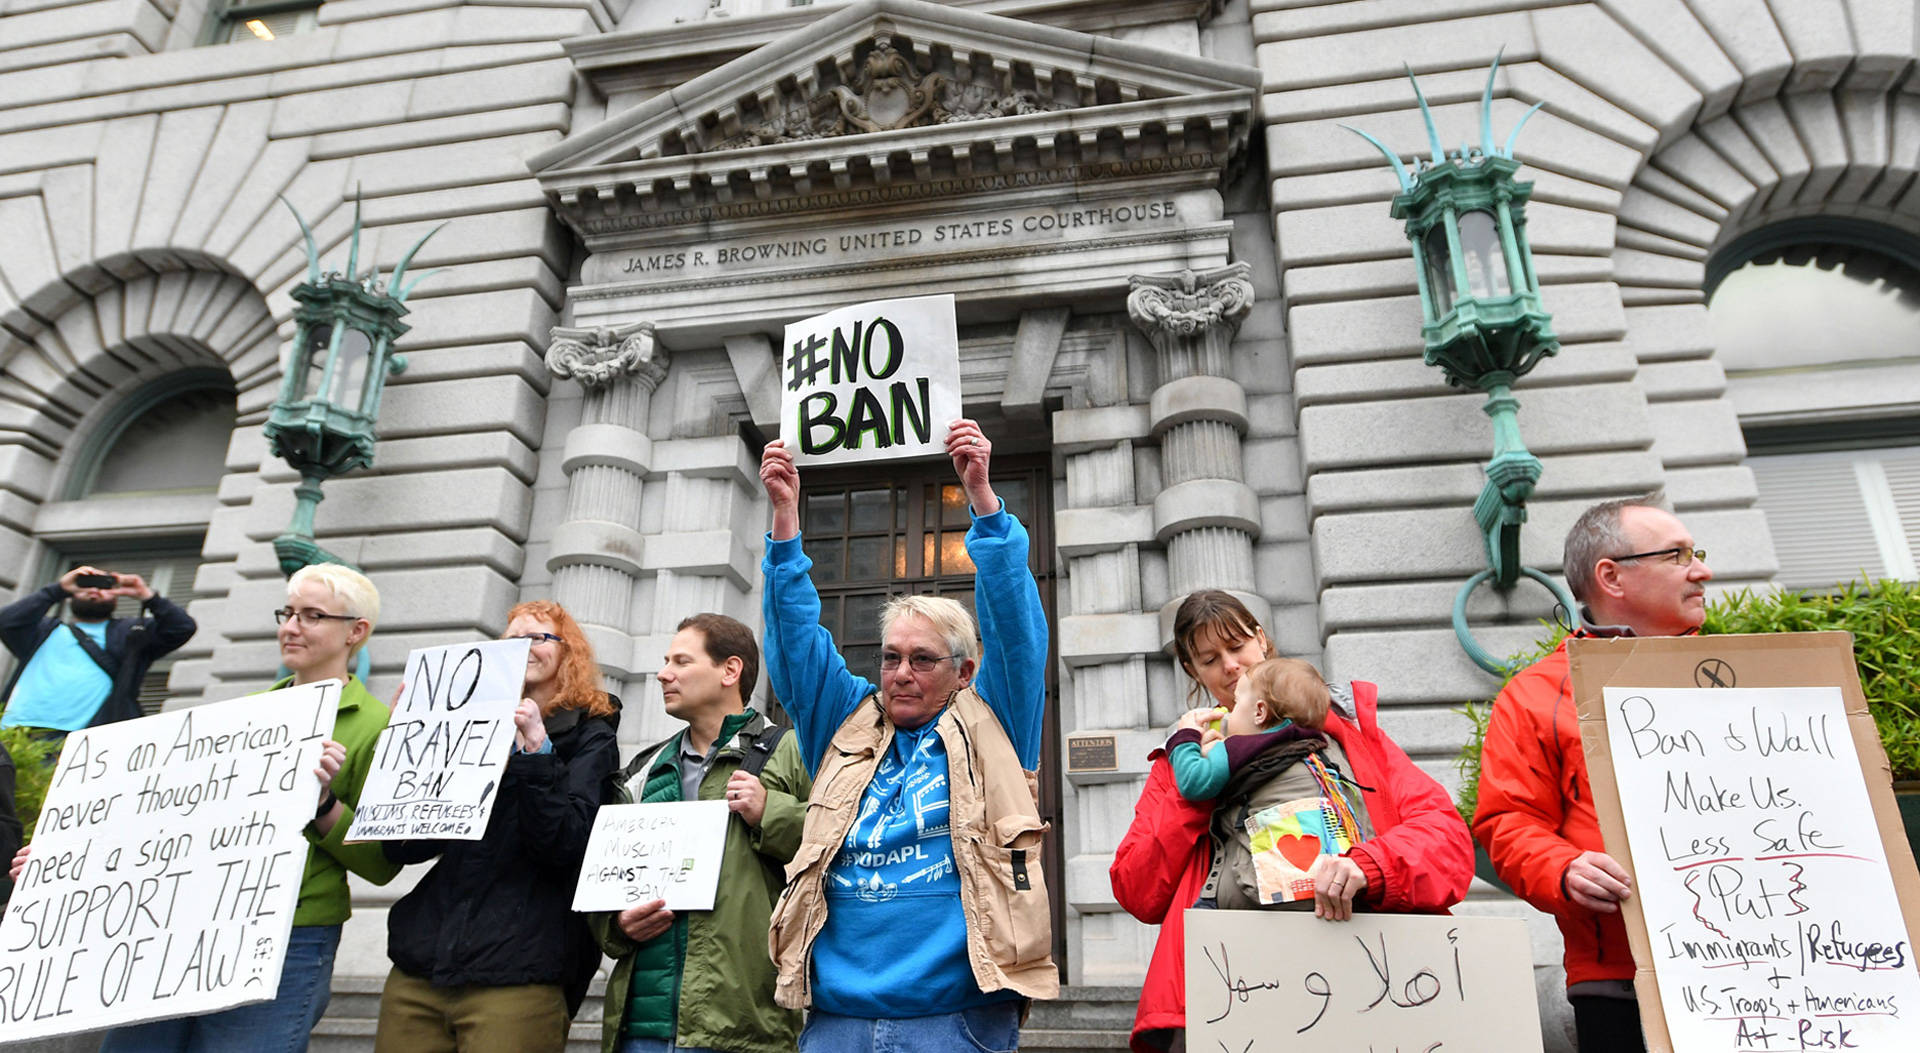 Protesters demonstrate in front of the U.S. 9th Circuit Court of Appeals in San Francisco on Feb. 7, 2017. Josh Edelson/AFP/Getty Images